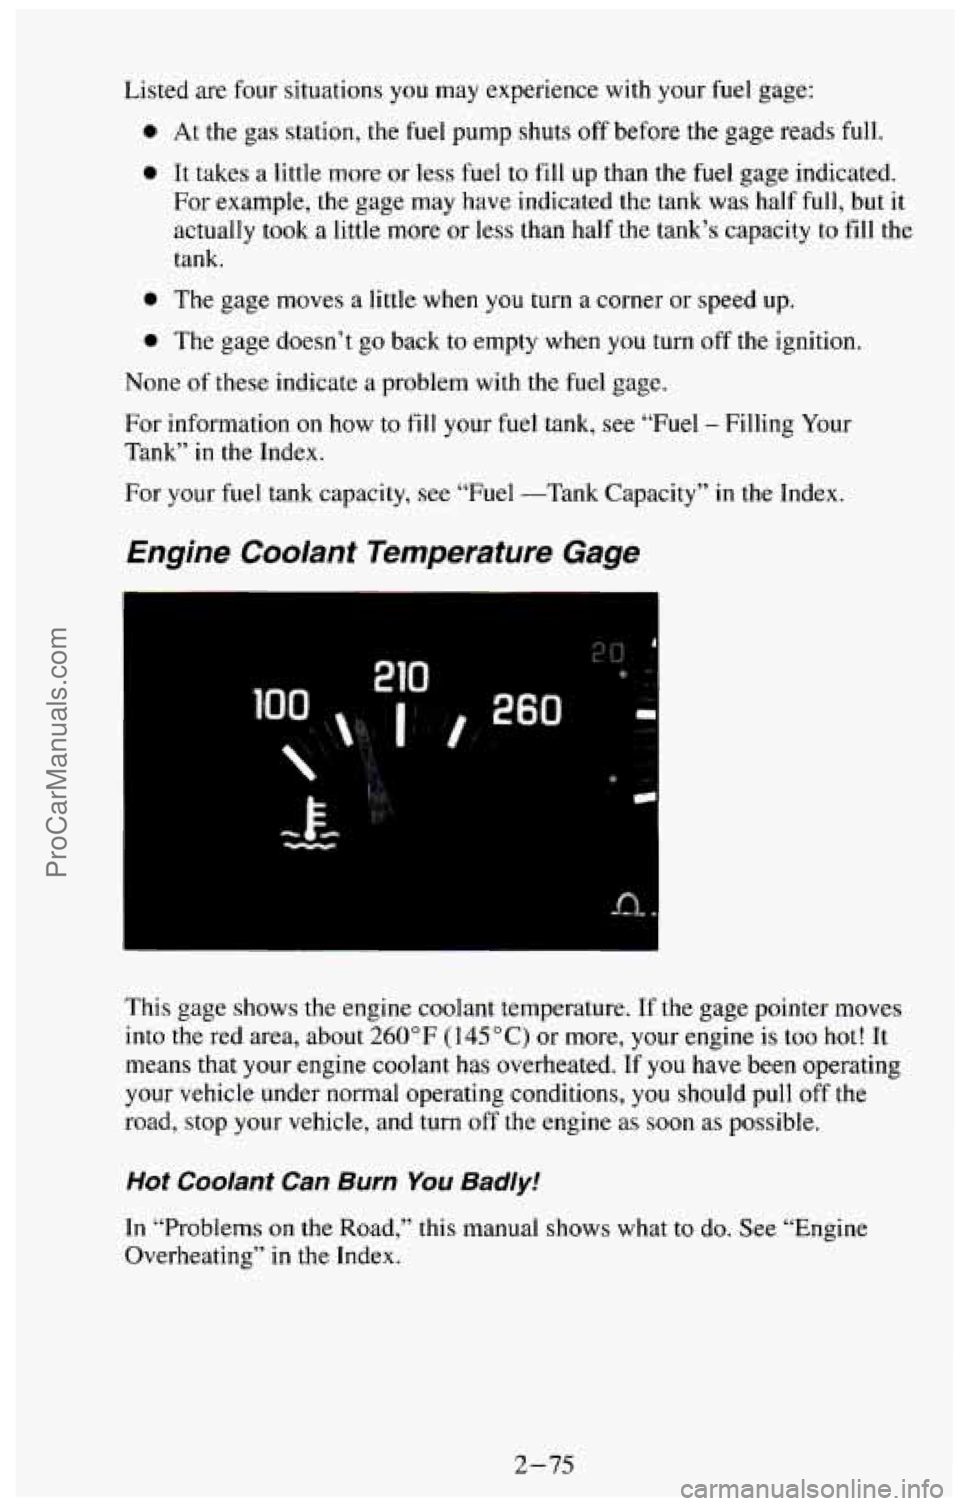 CHEVROLET SUBURBAN 1994  Owners Manual Listed are four situations  you  may experience with your fuel  gage: 
0 At the gas station, the fuel  pump shuts off before the gage  reads  full. 
0 It takes  a little  more  or less fuel  to fill u